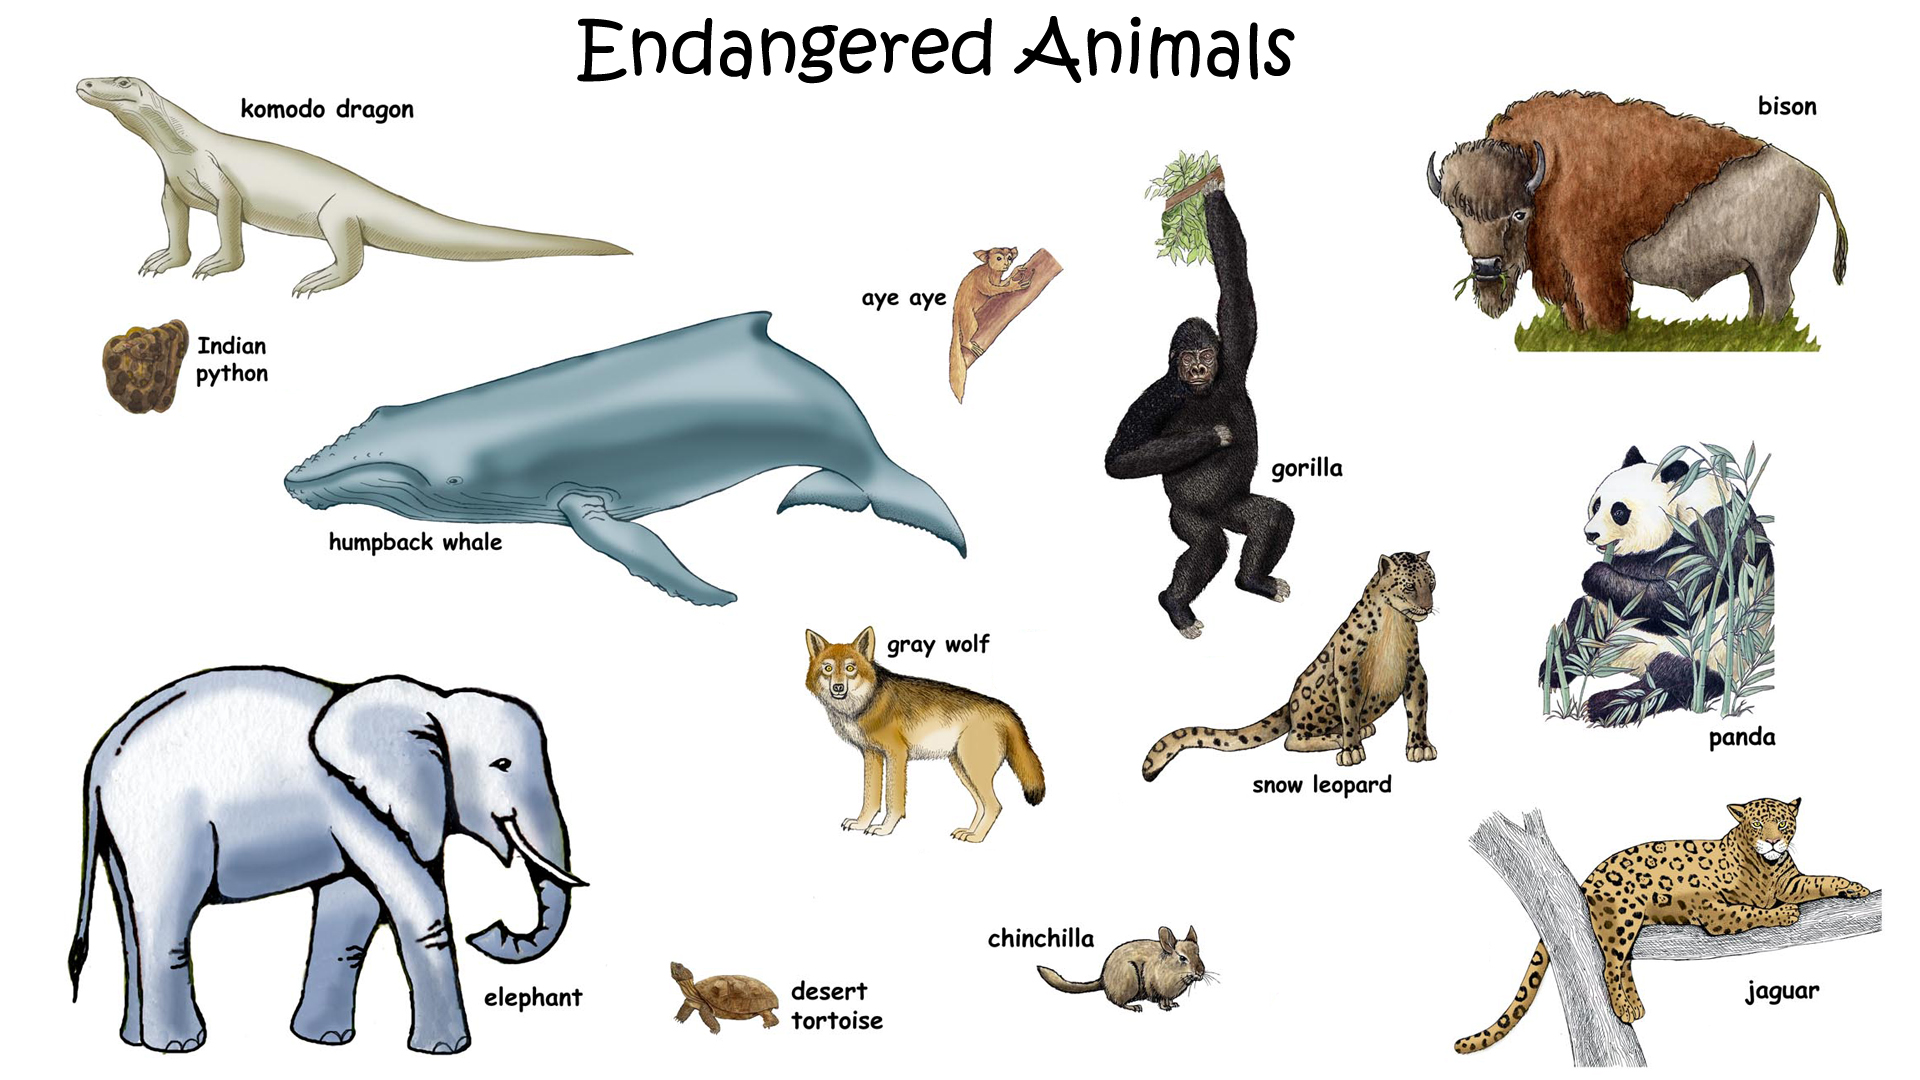 Name Of The Endangered Animals